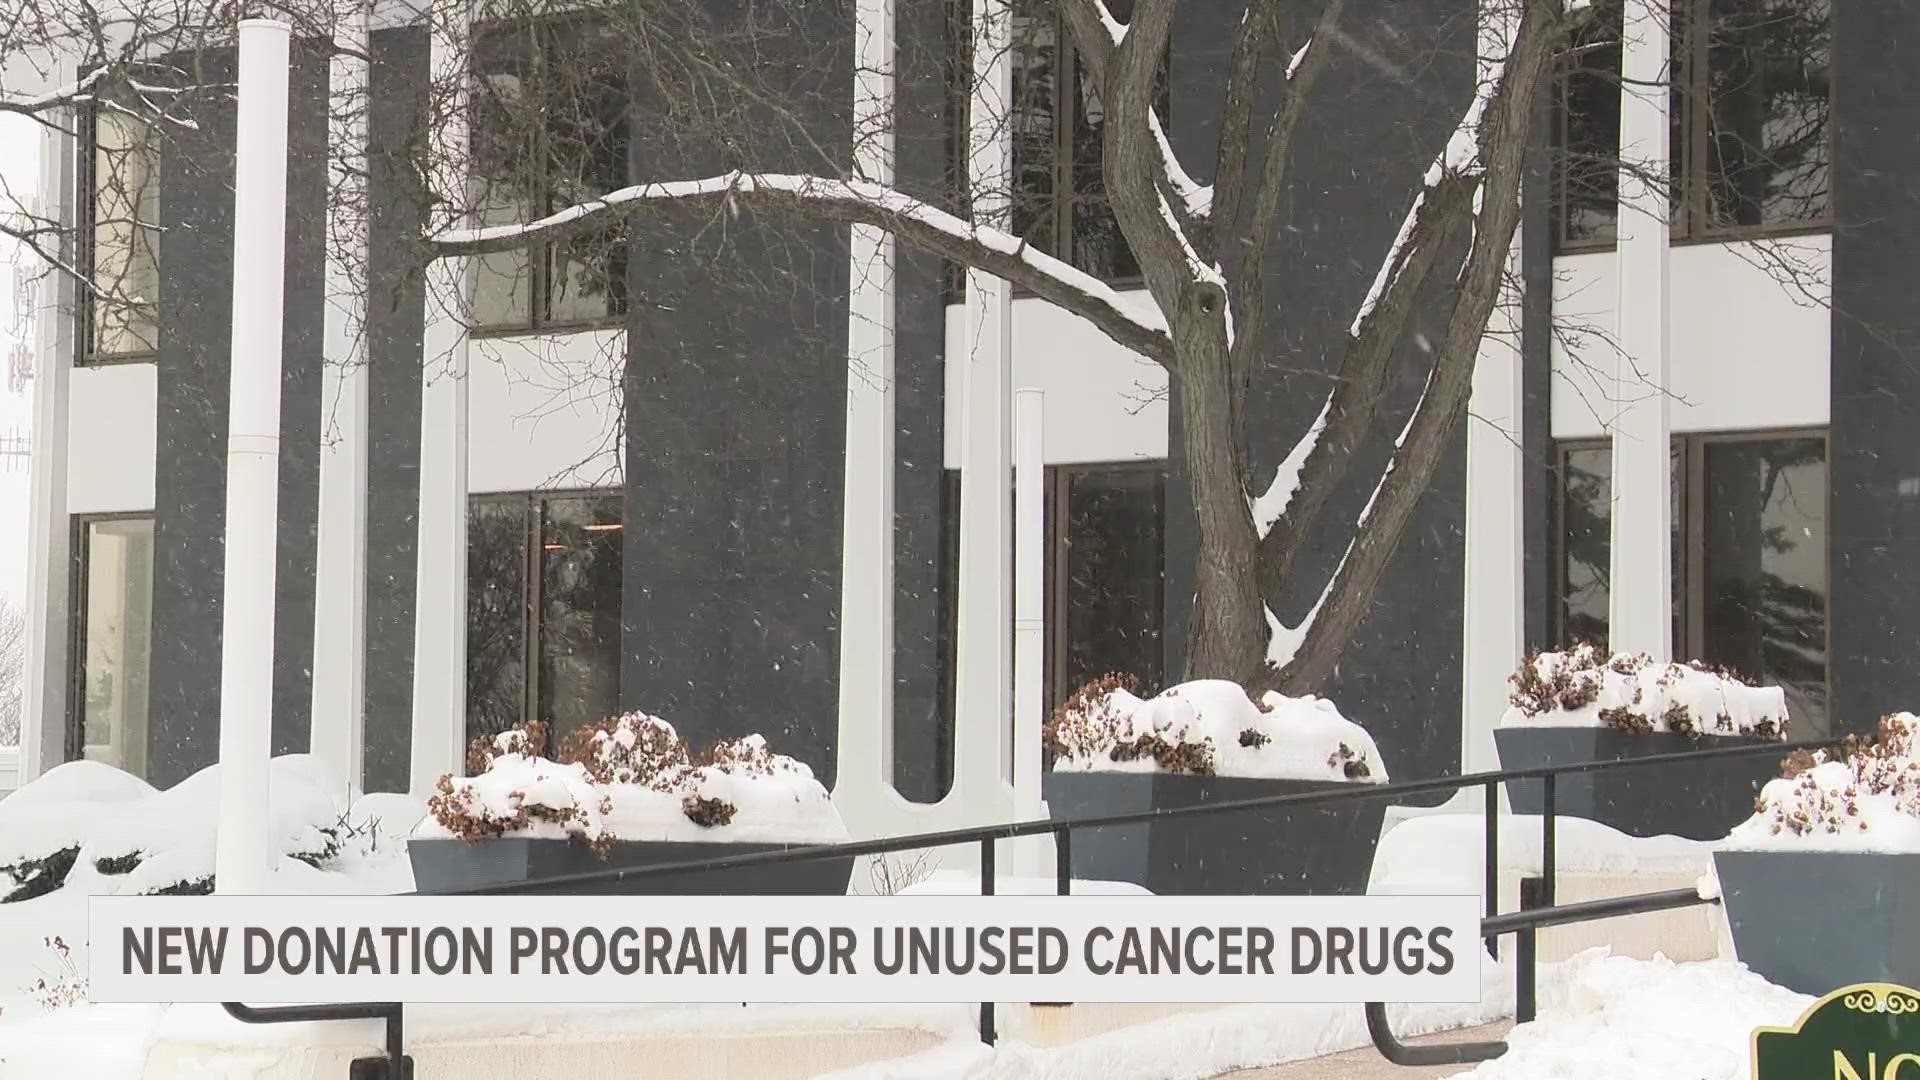 The Michigan Board of Pharmacy has approved a program allowing people to donate qualified unused oral cancer drugs.